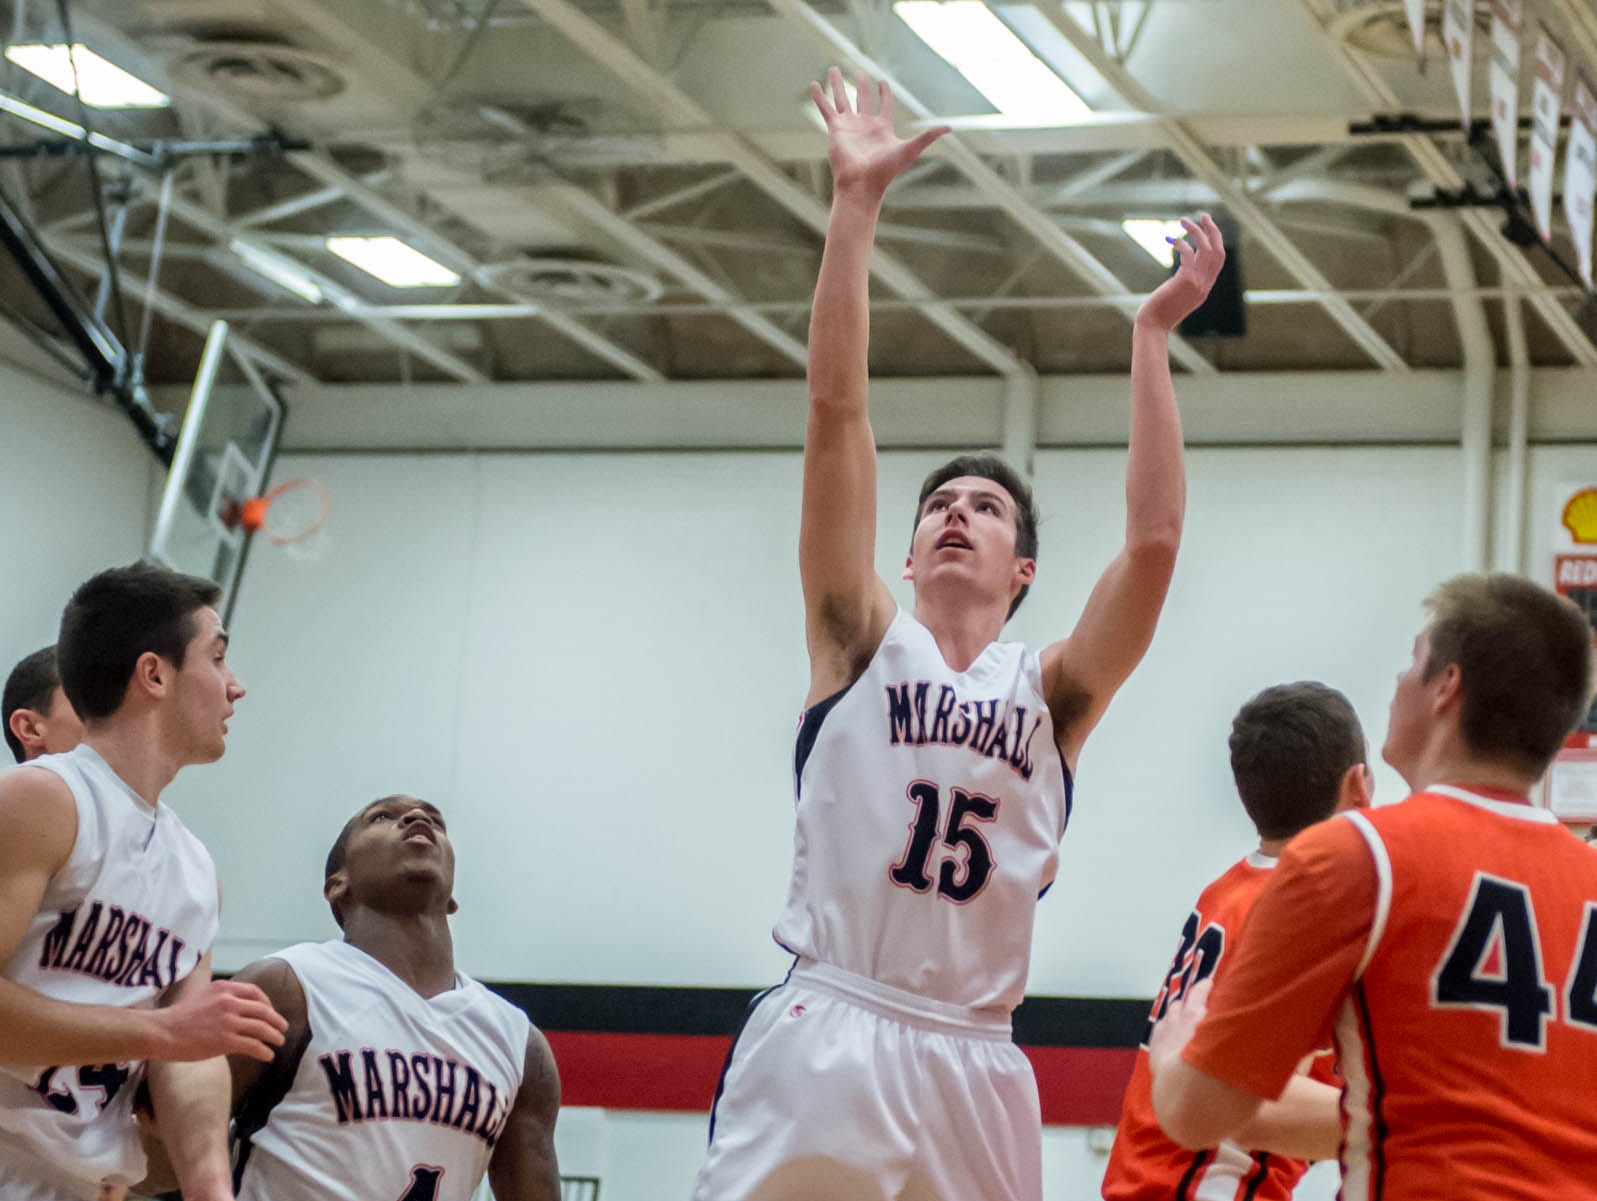 Marshall's T.J. Rocco (15) goes for the hoop against Chatlotte in Tuesday evening's game.